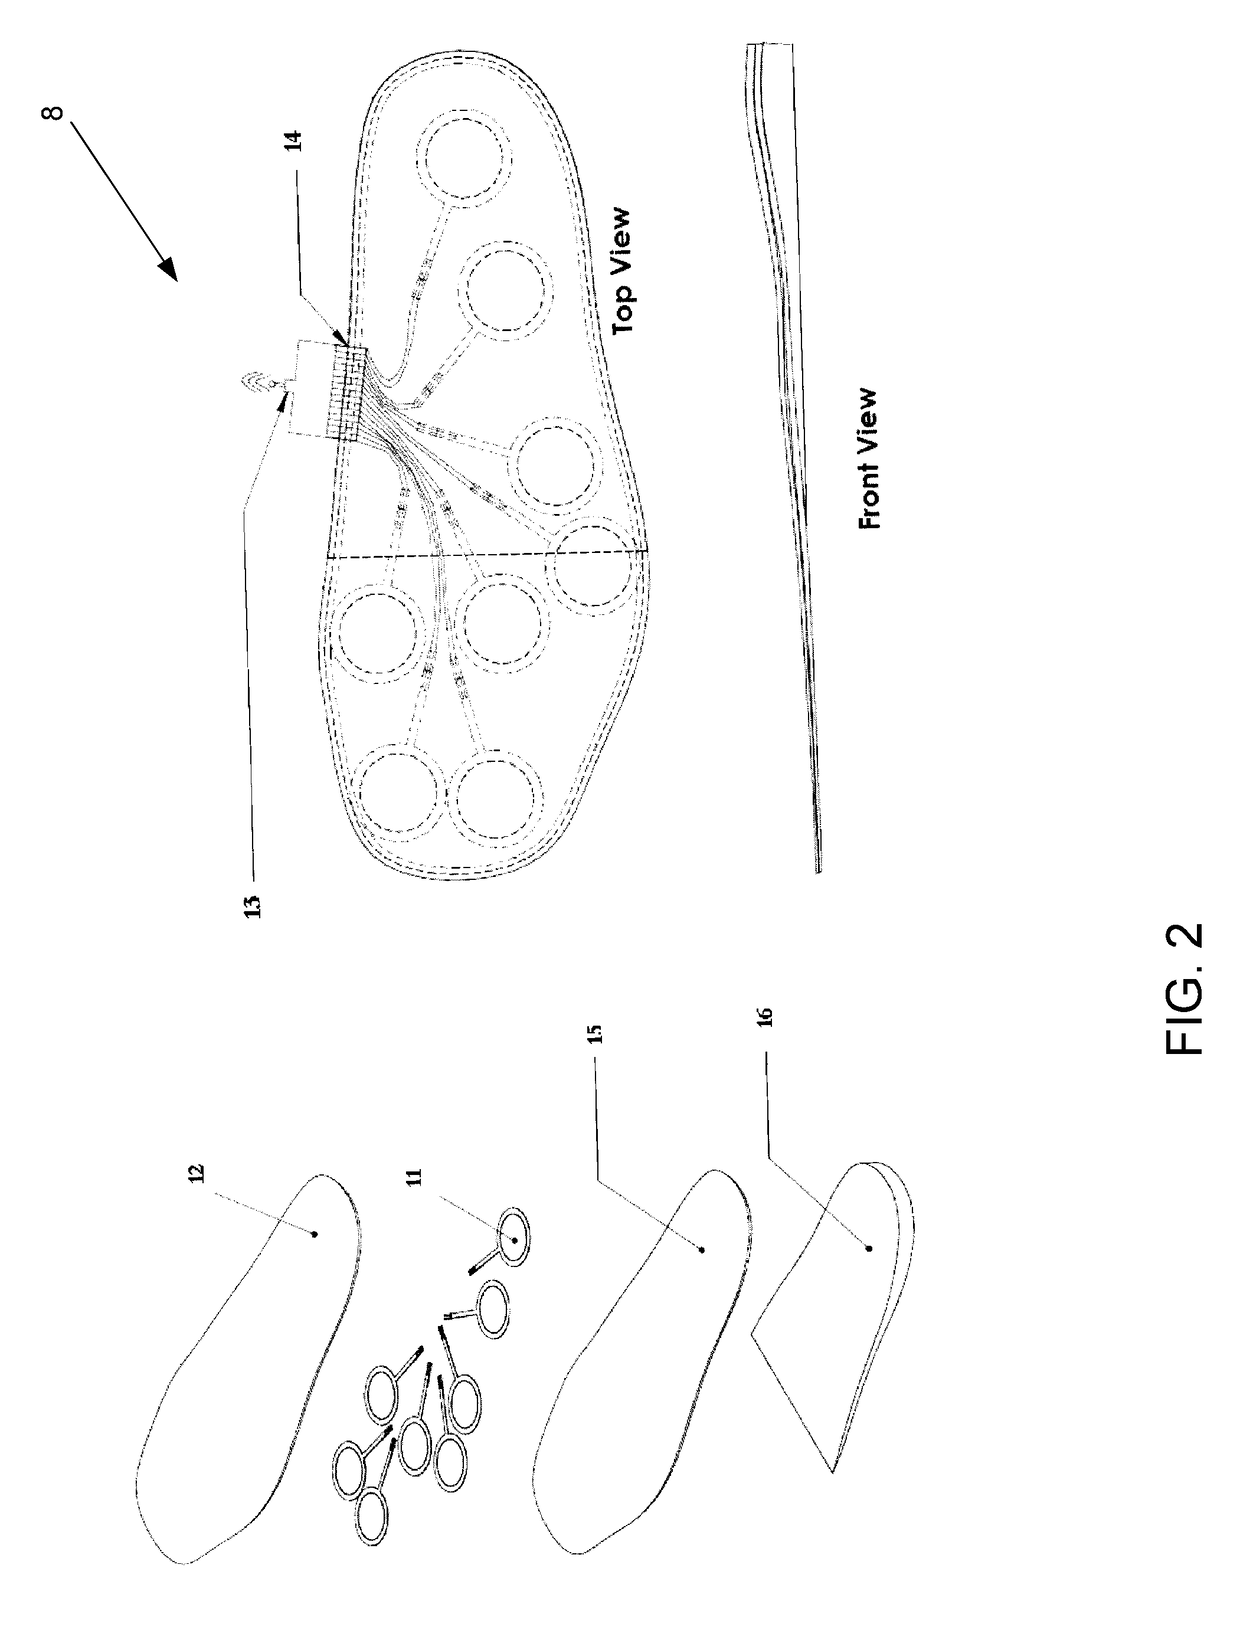 Foot gesture-based control device